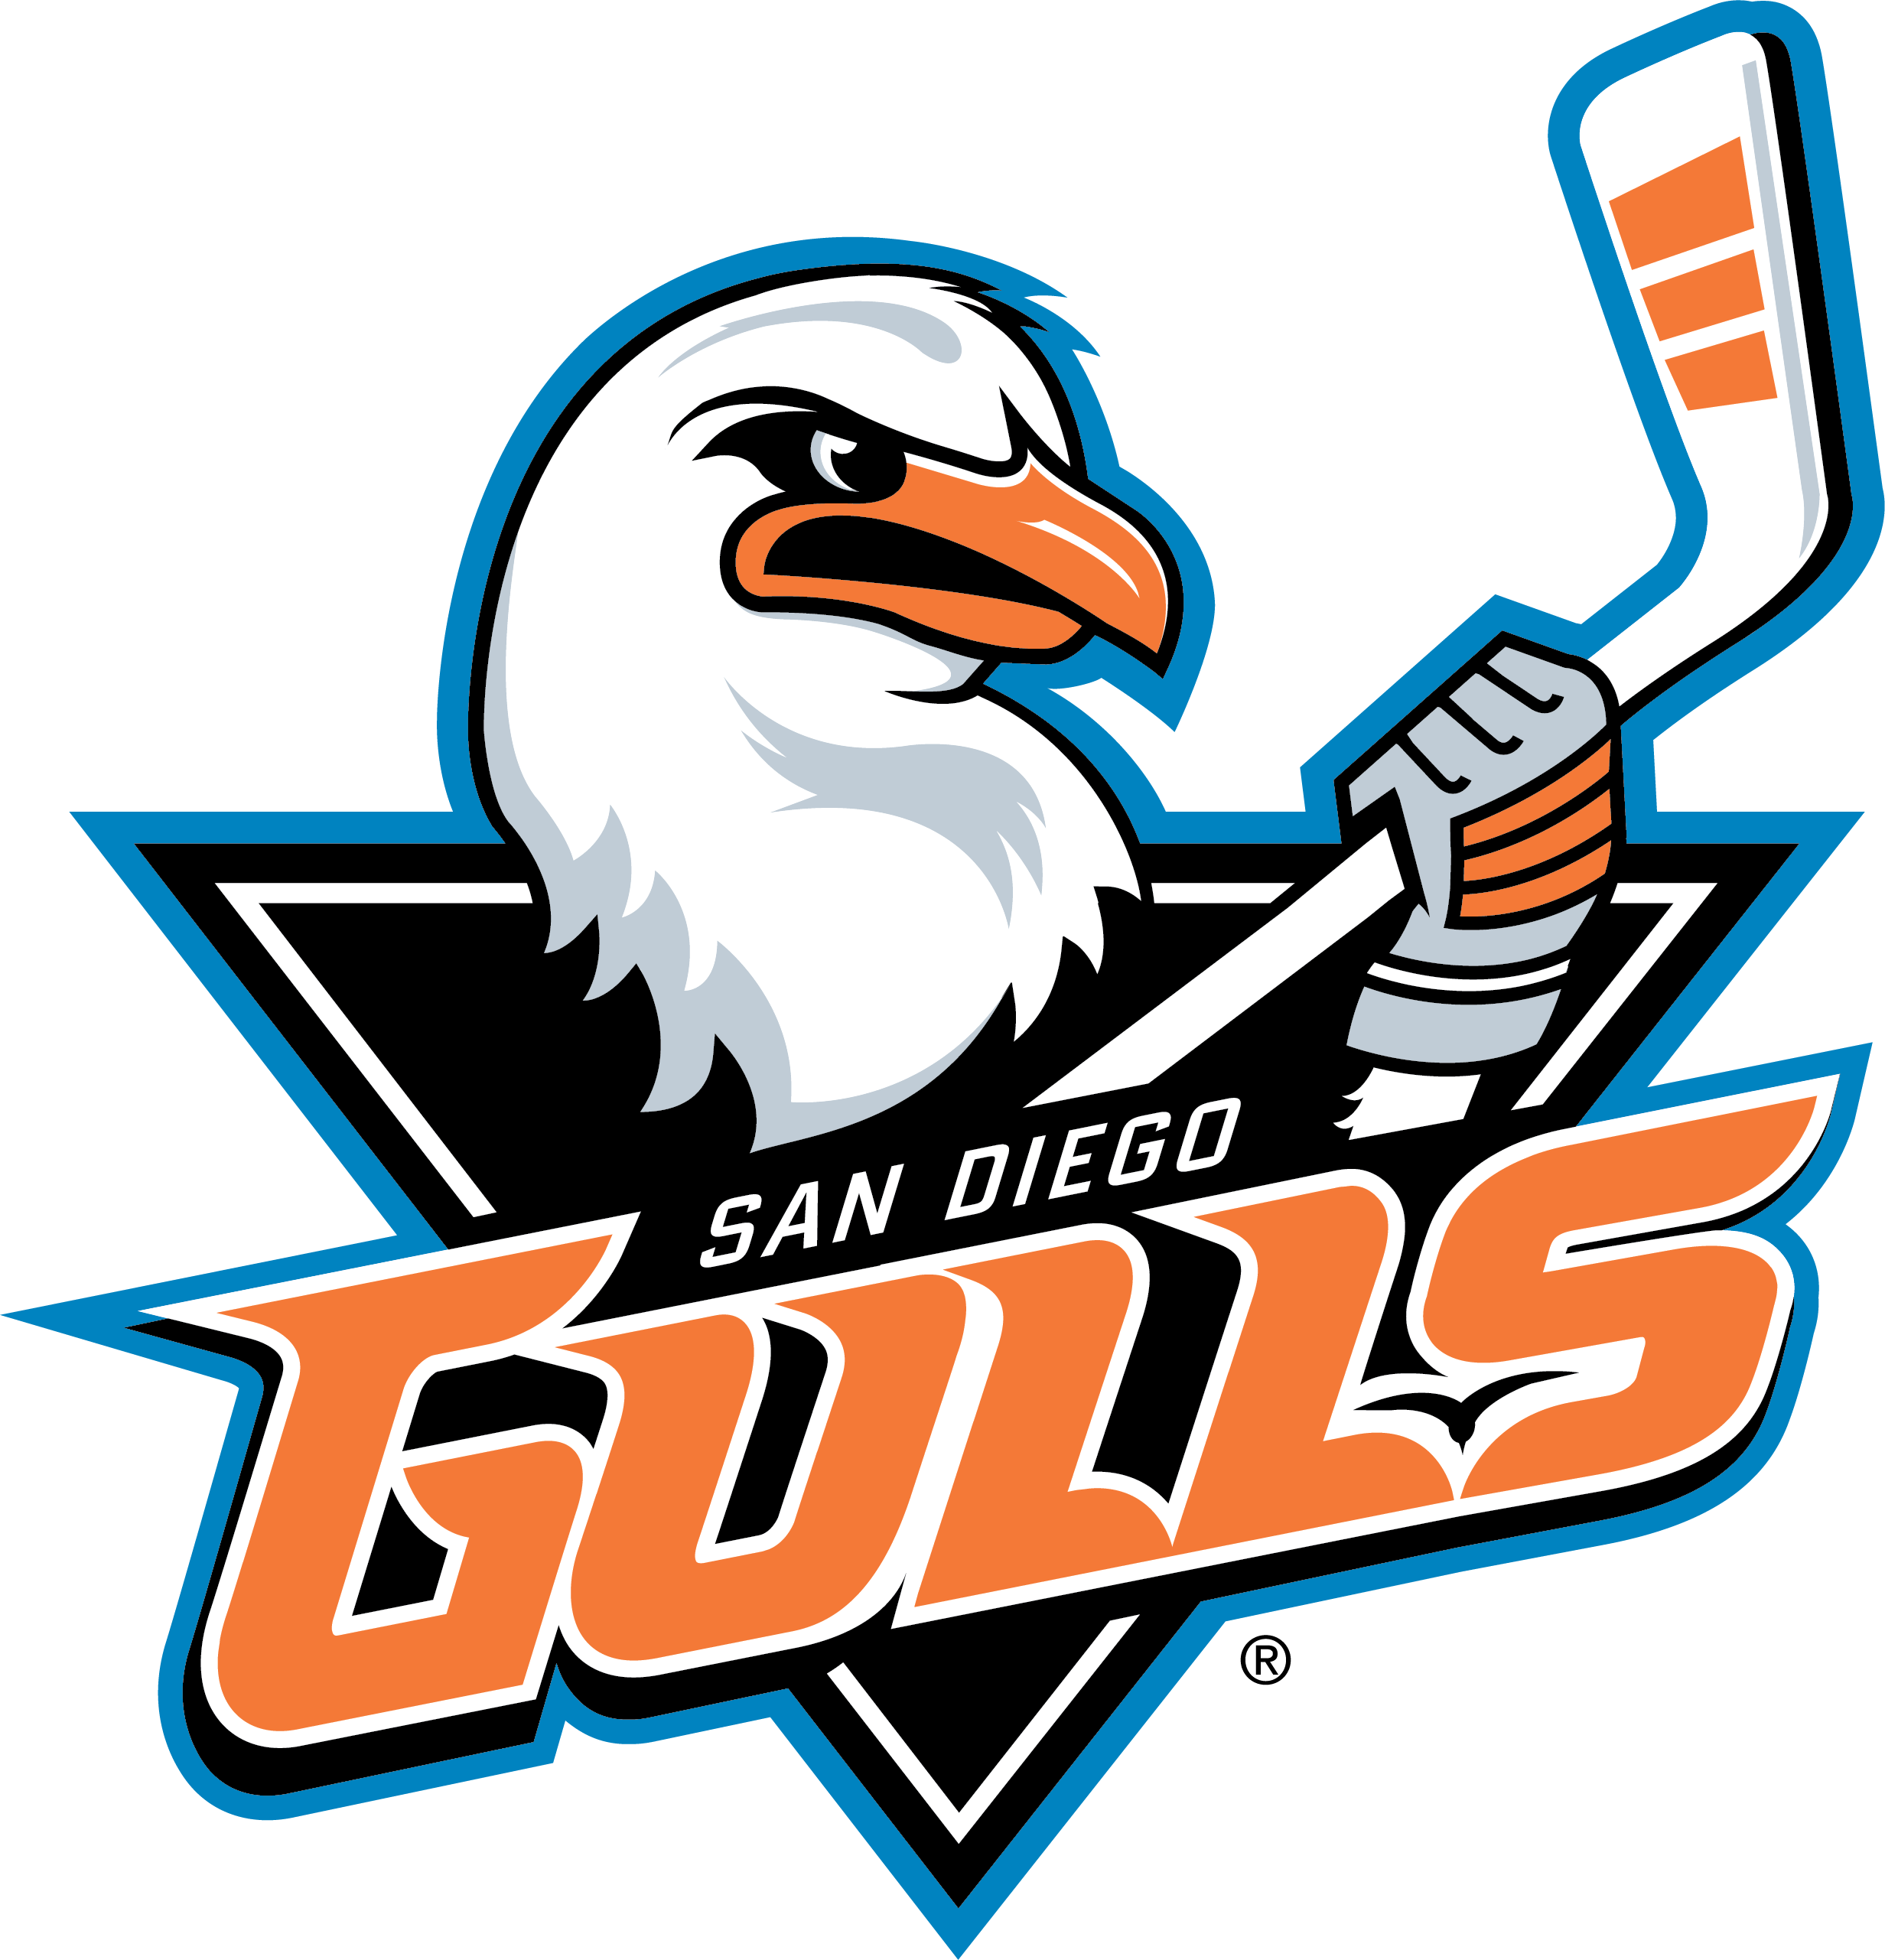 San Diego Gulls jersey has made its way all the way to Australia